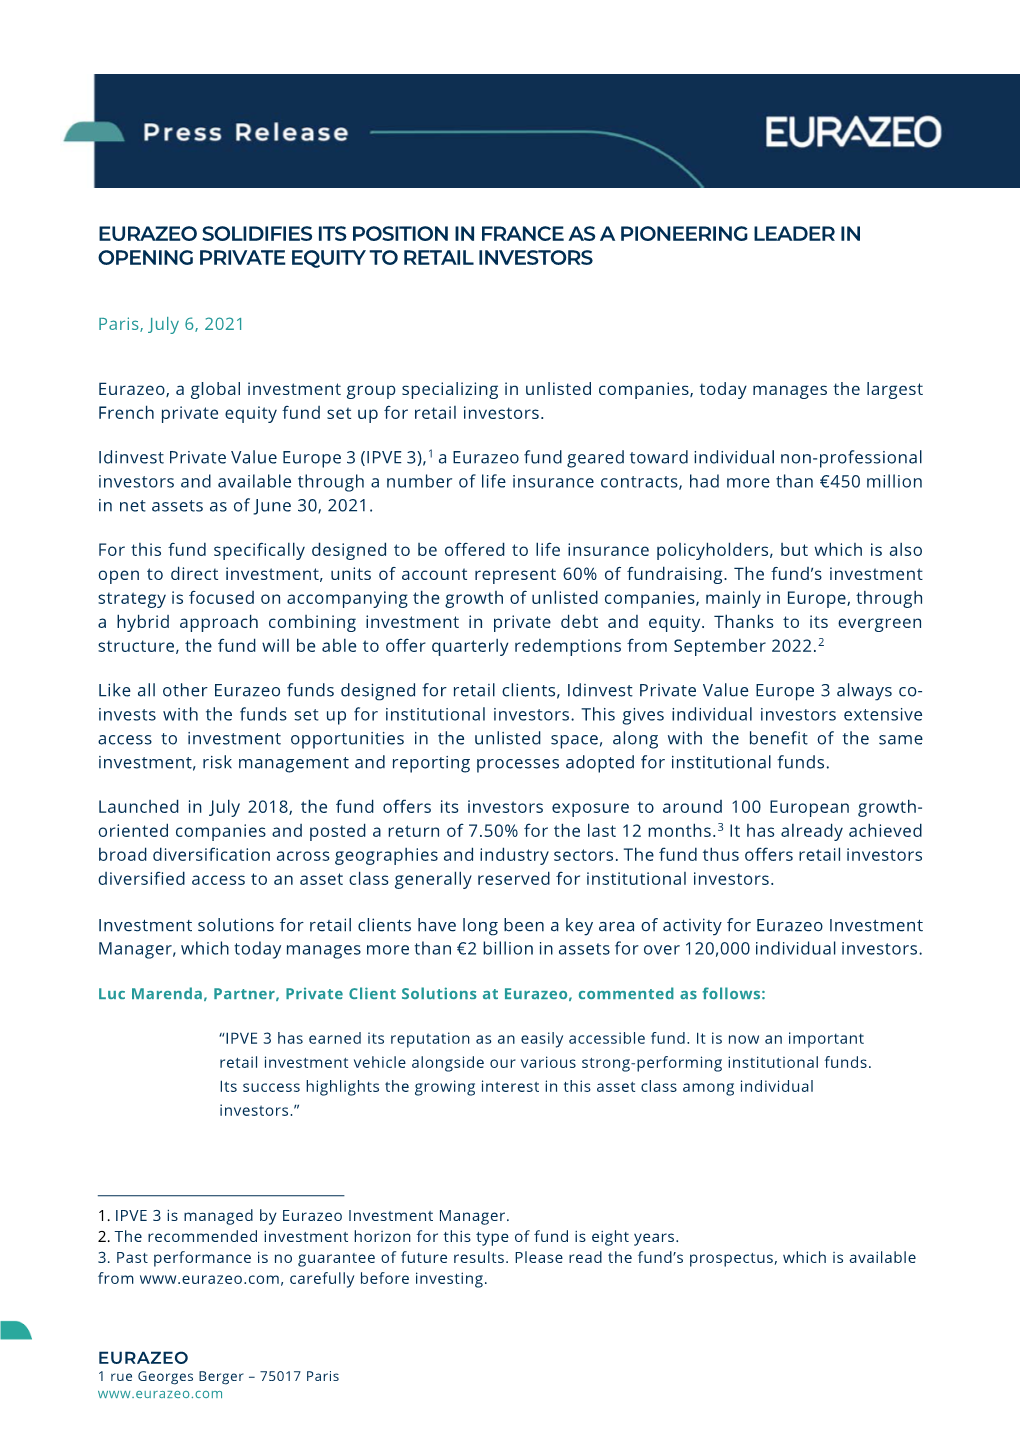 Eurazeo Solidifies Its Position in France As a Pioneering Leader in Opening Private Equity to Retail Investors